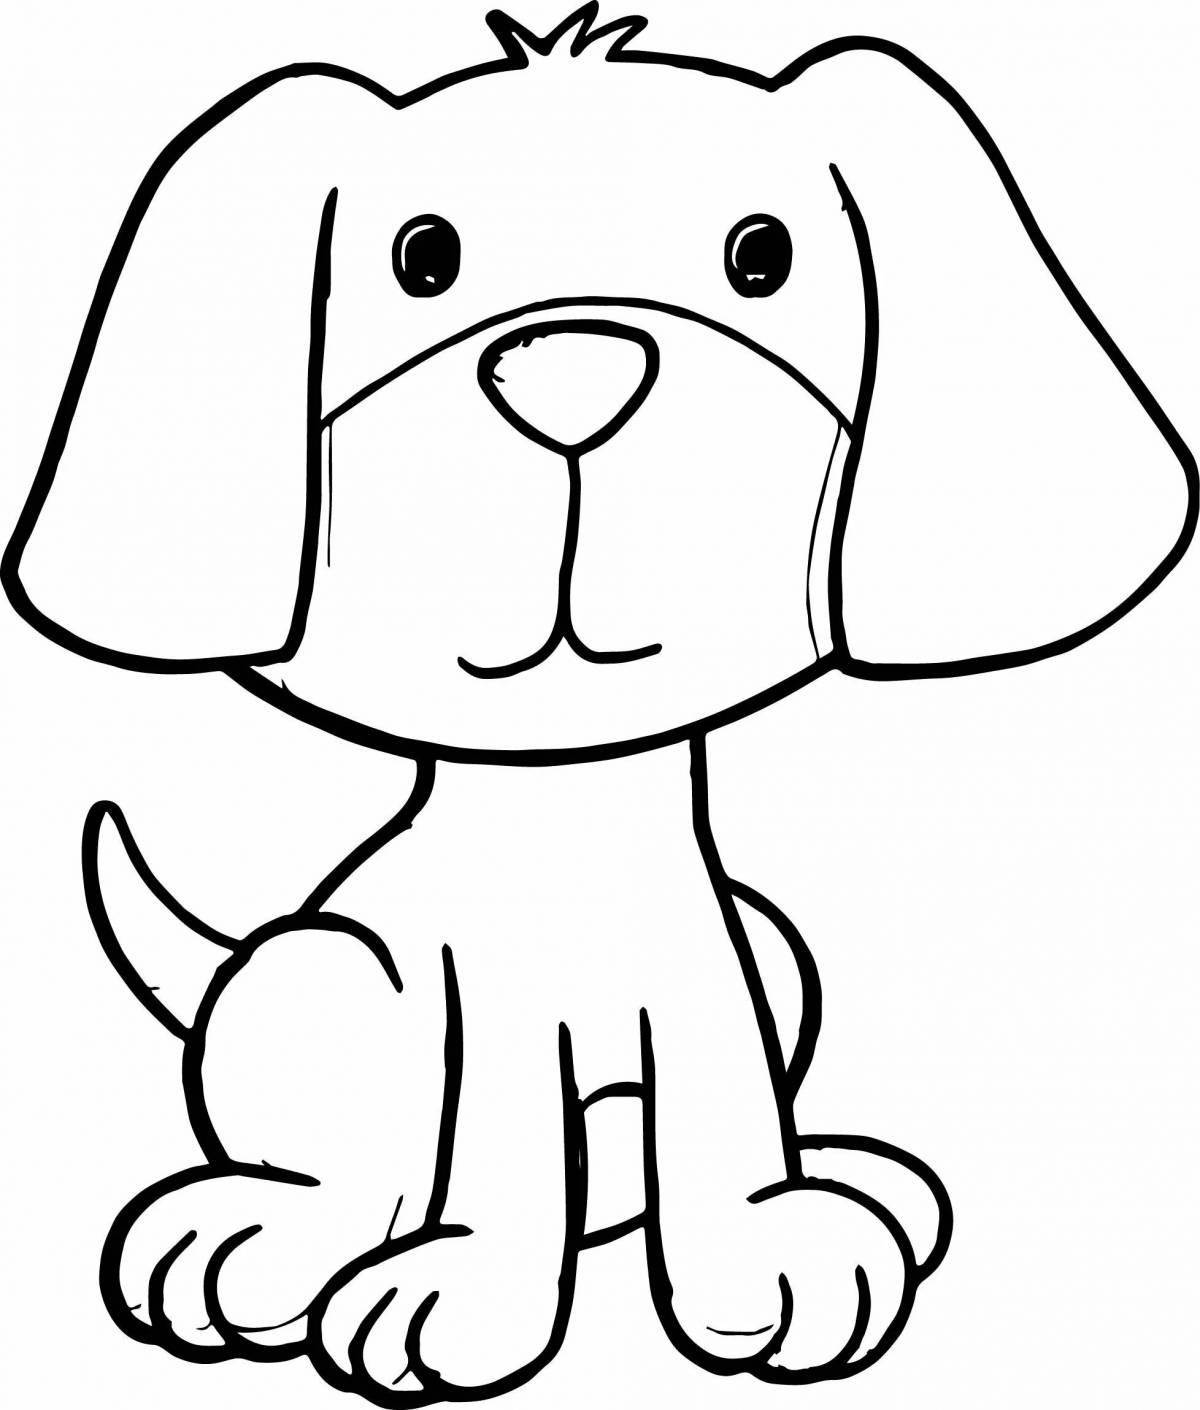 Colorful light dogs coloring page